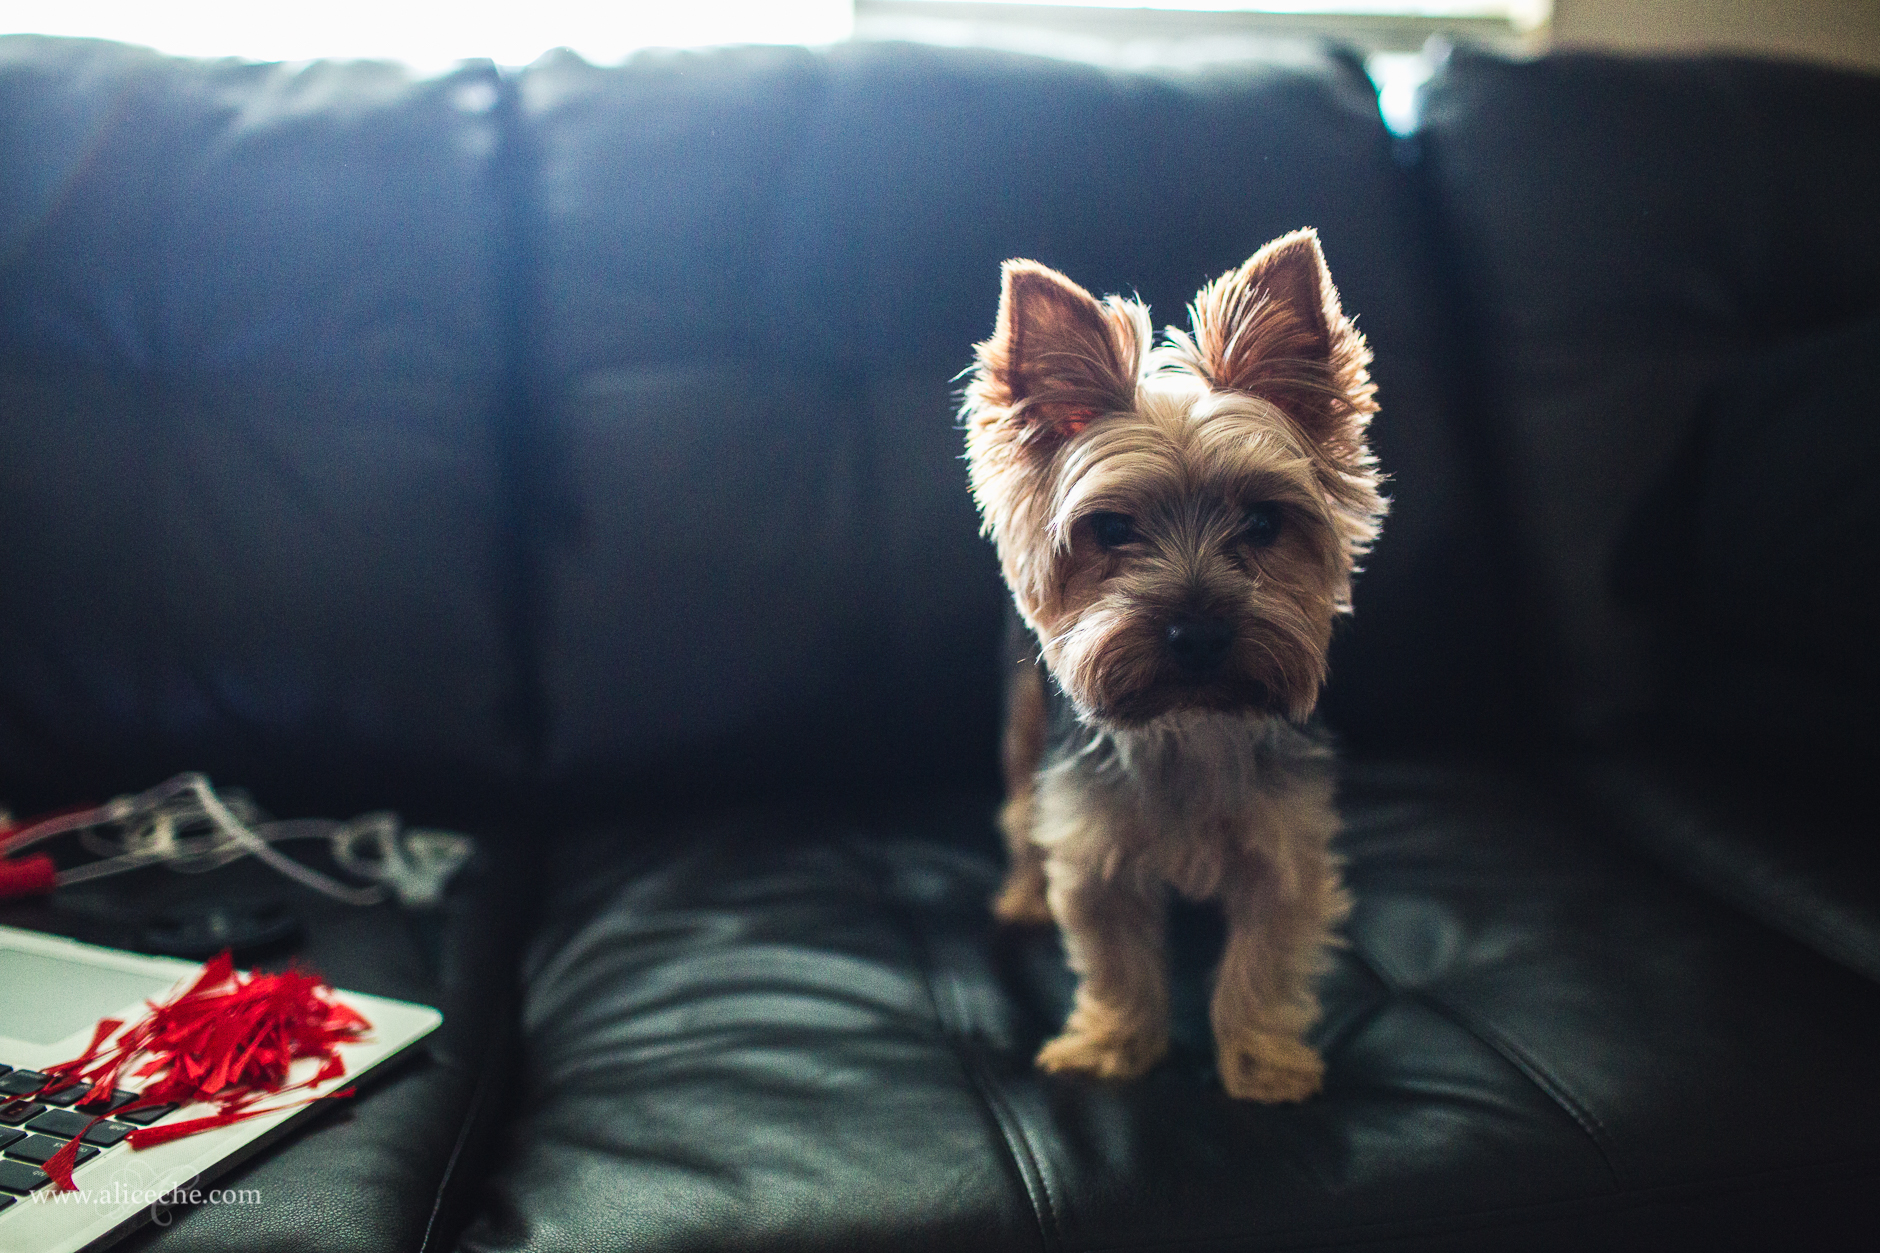 alice-che-photography-backlit-yorkshire-terrier-on-couch